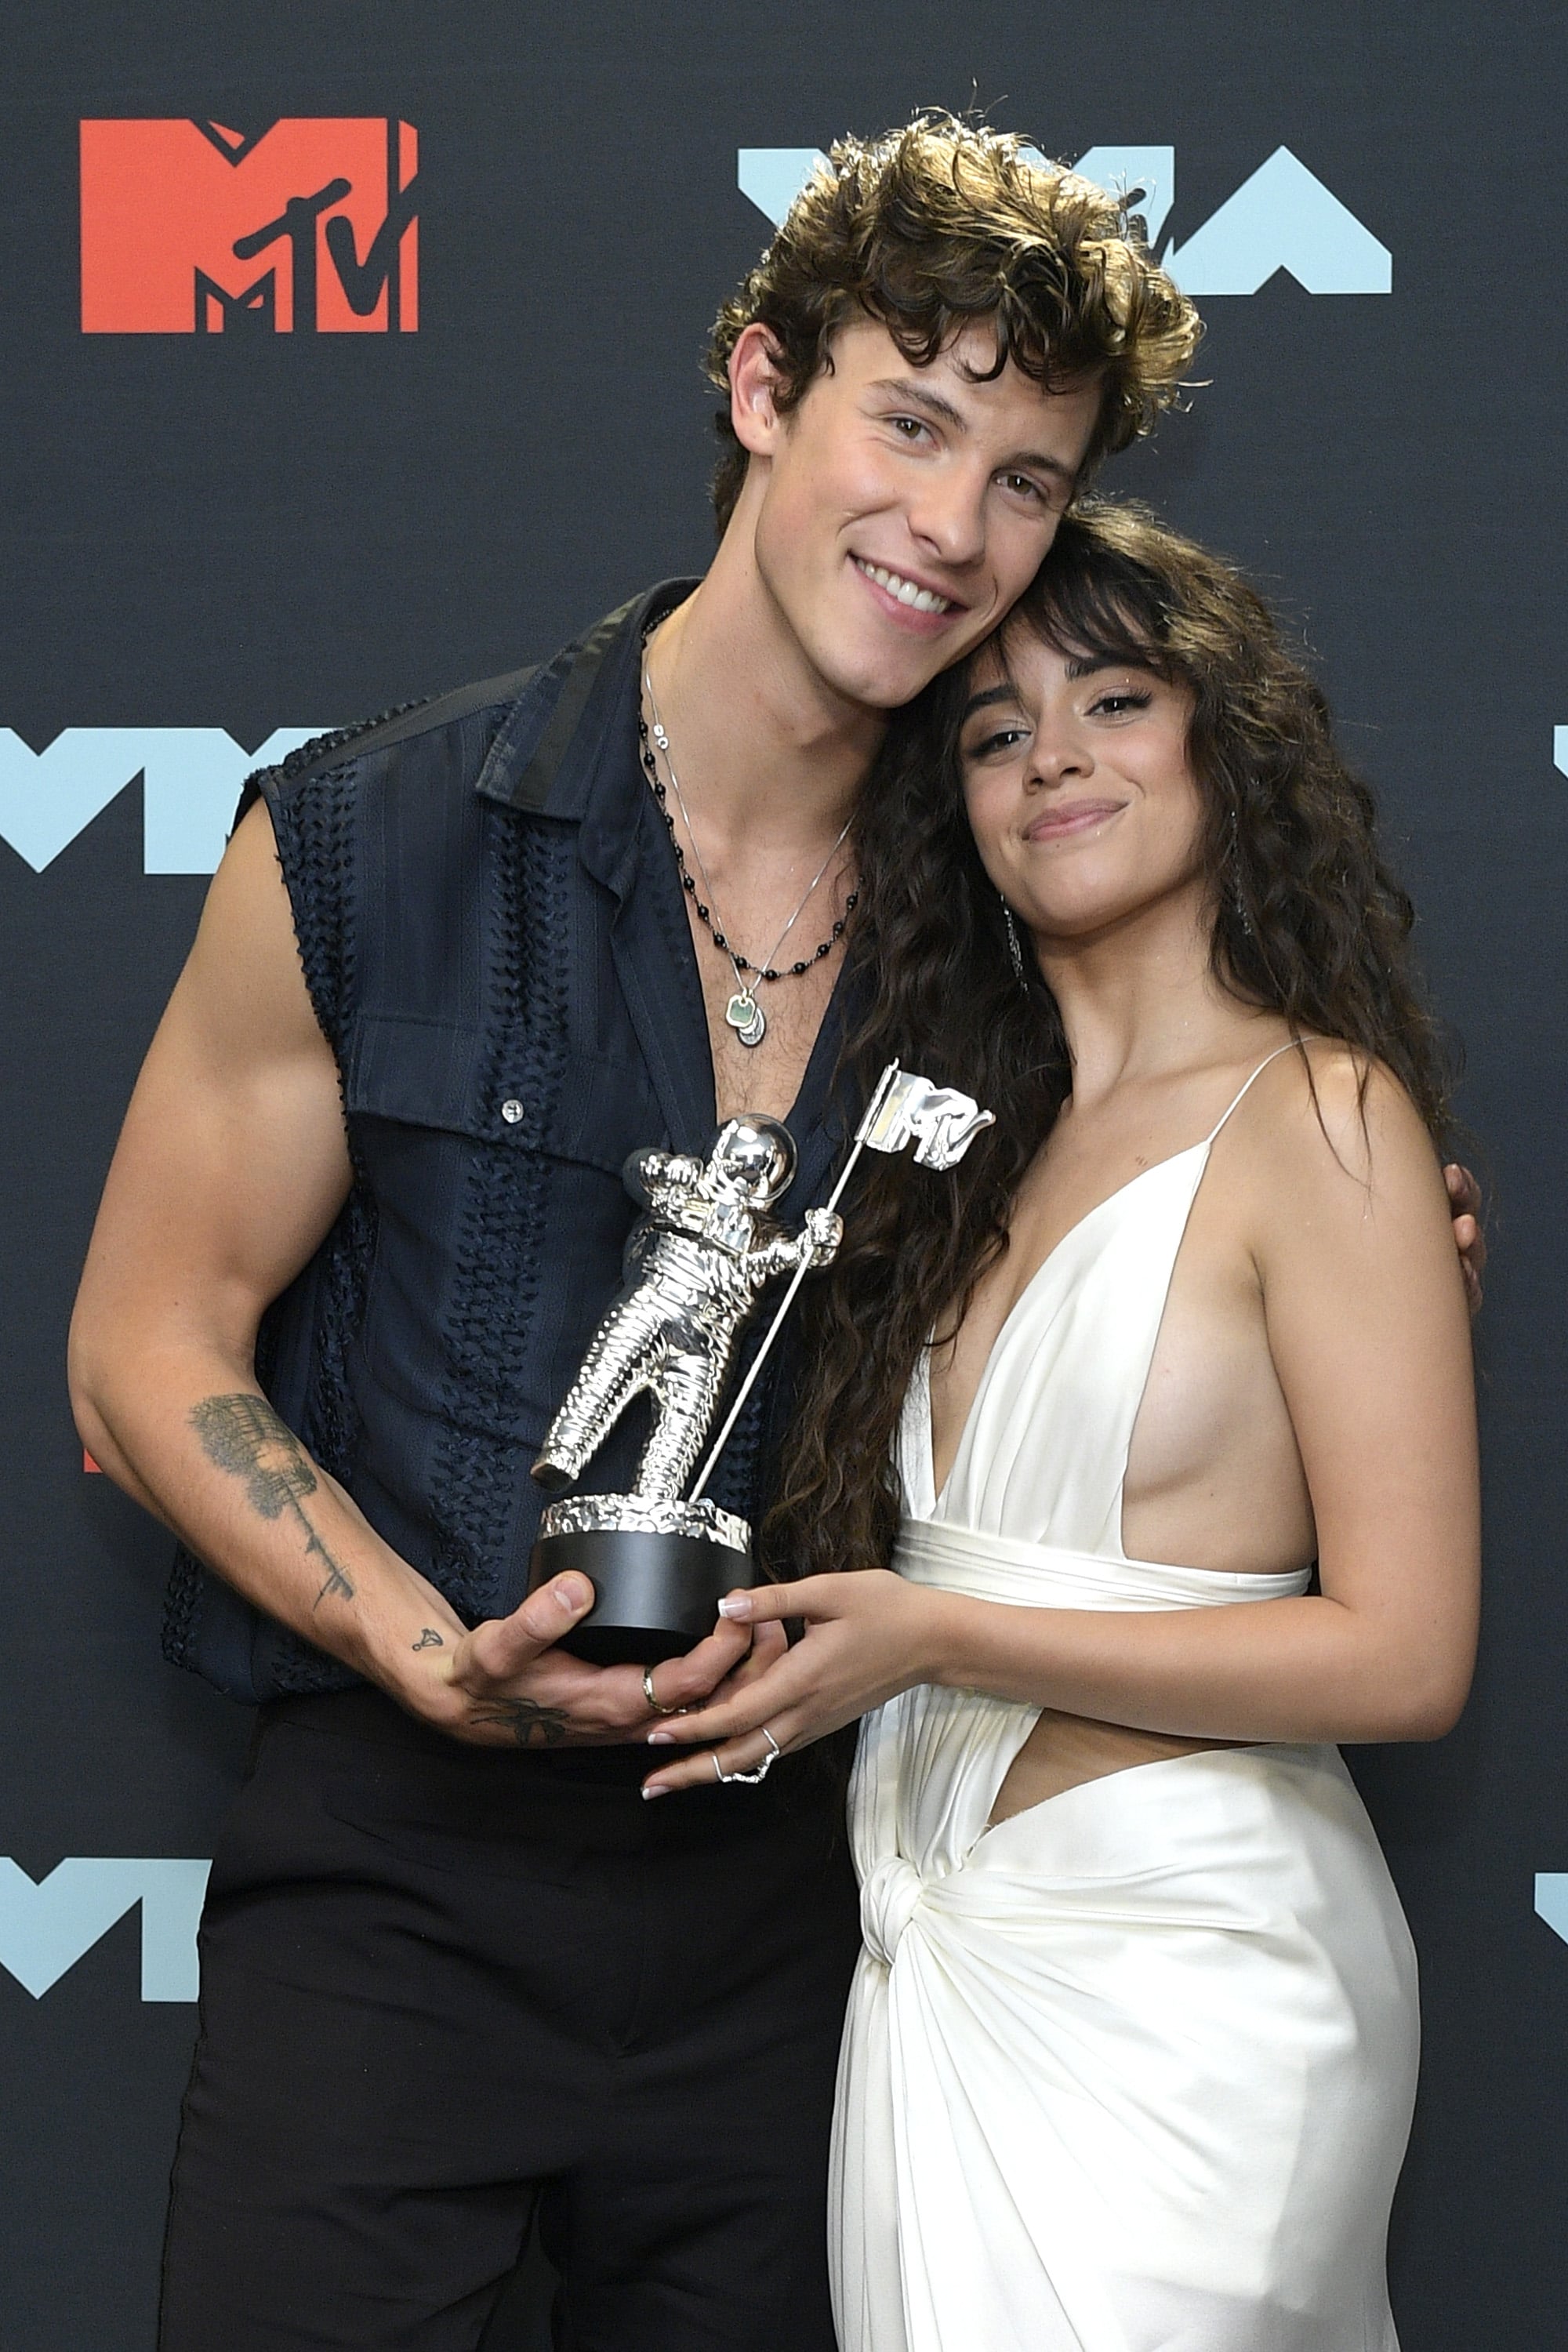 NEWARK, NEW JERSEY - AUGUST 26: Shawn Mendes and Camila Cabello pose with the Best Collaboration Award in the Press Room during the 2019 MTV Video Music Awards at Prudential Centre on August 26, 2019 in Newark, New Jersey. (Photo by Roy Rochlin/Getty Images for MTV)